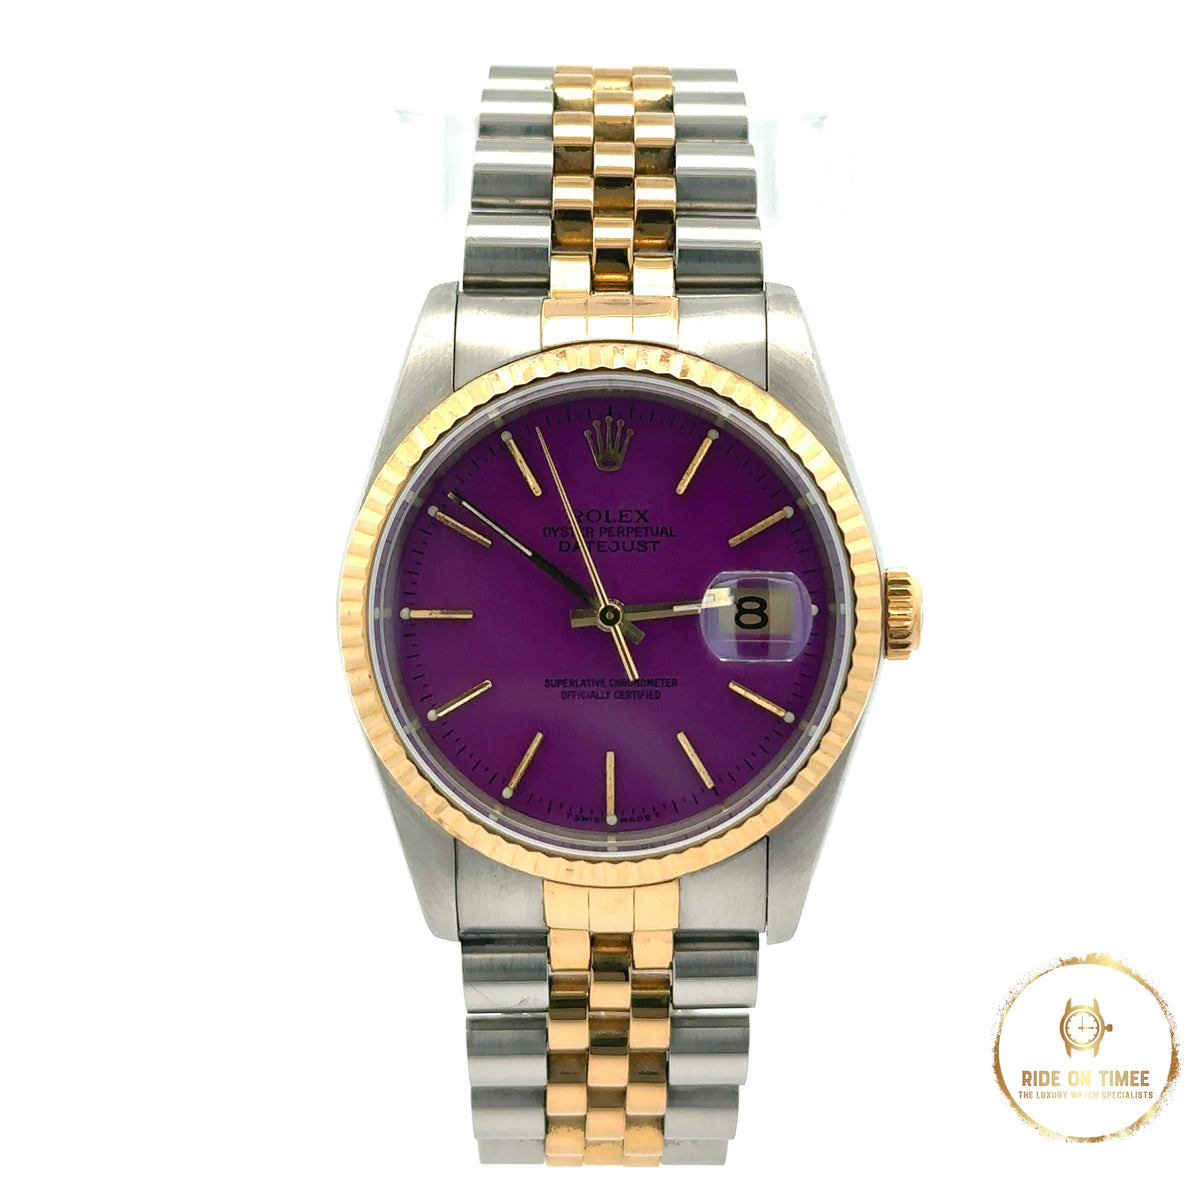 Rolex Datejust 36 Refinished Purple Baton Dial - Ride On Timee